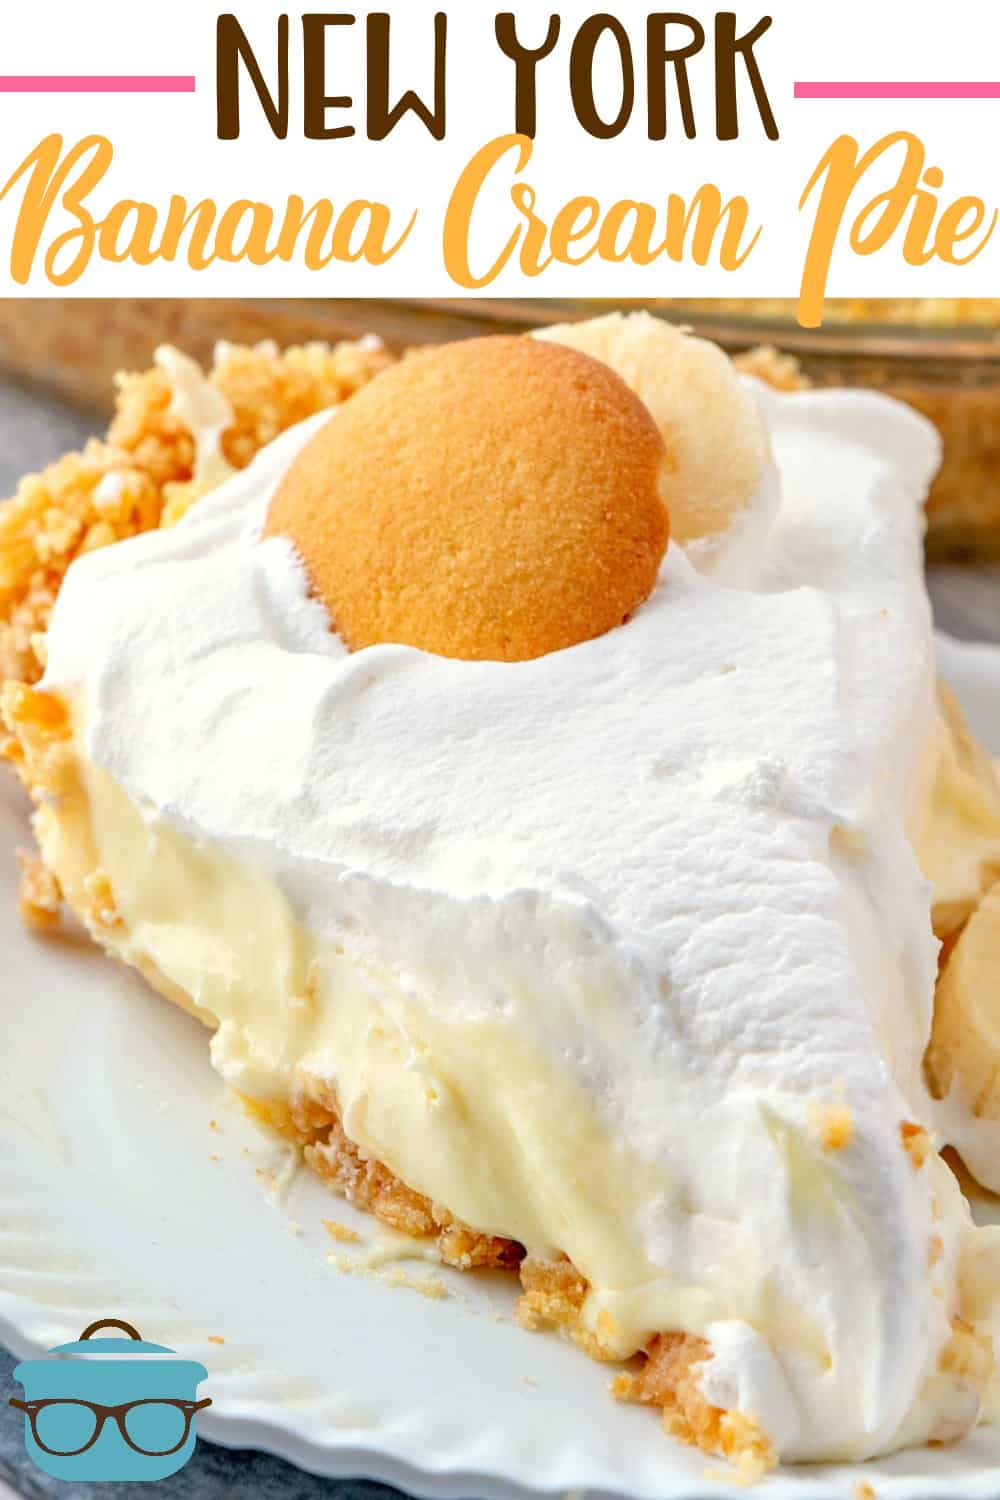 New York style Banana Cream Pie with a Nilla Wafer crust recipe from The Country Cook.